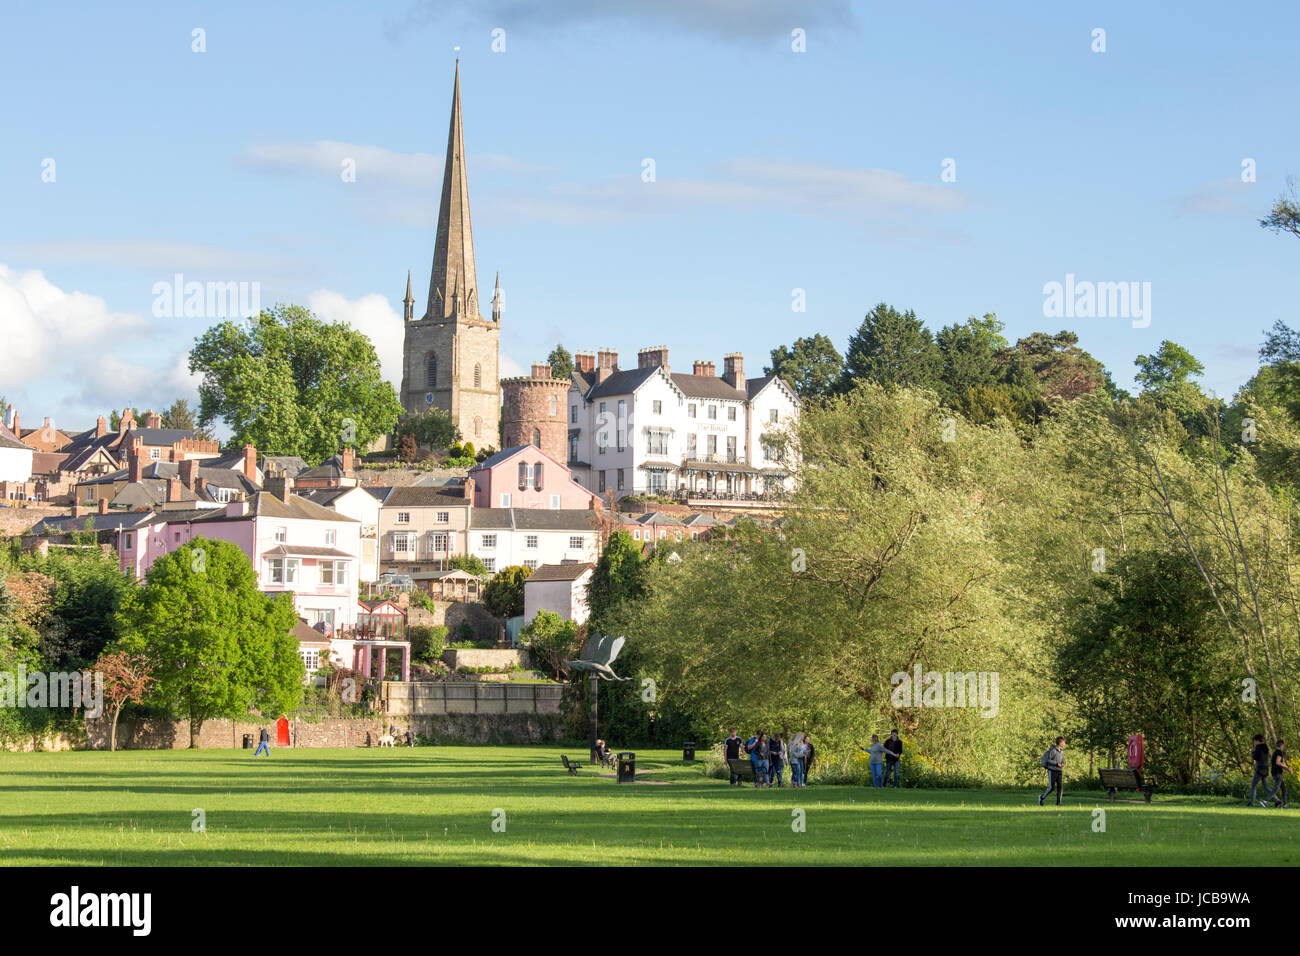 The attractive riverside town of Ross on Wye, Herefordshire, England, UK Stock Photo